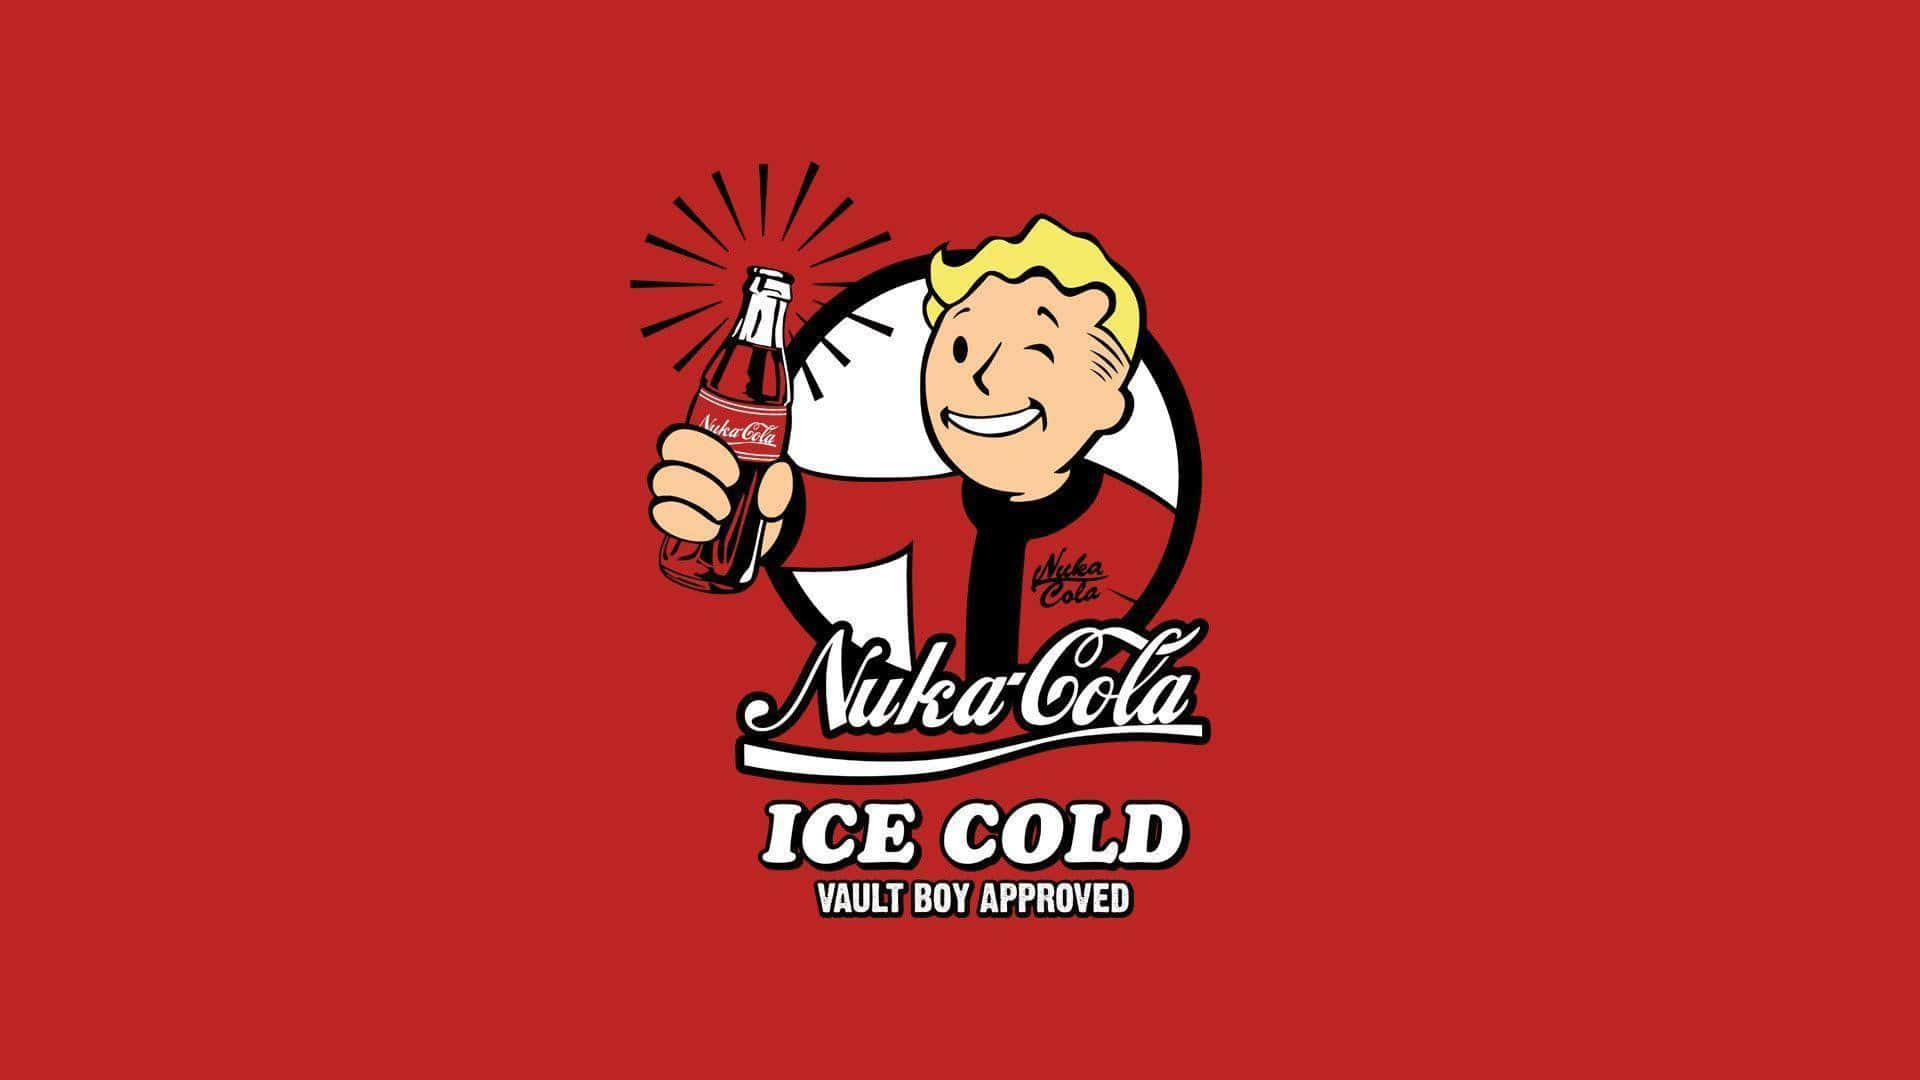 A Cartoon Character Holding A Cigarette And Holding A Bottle Of Ice Cold Wallpaper